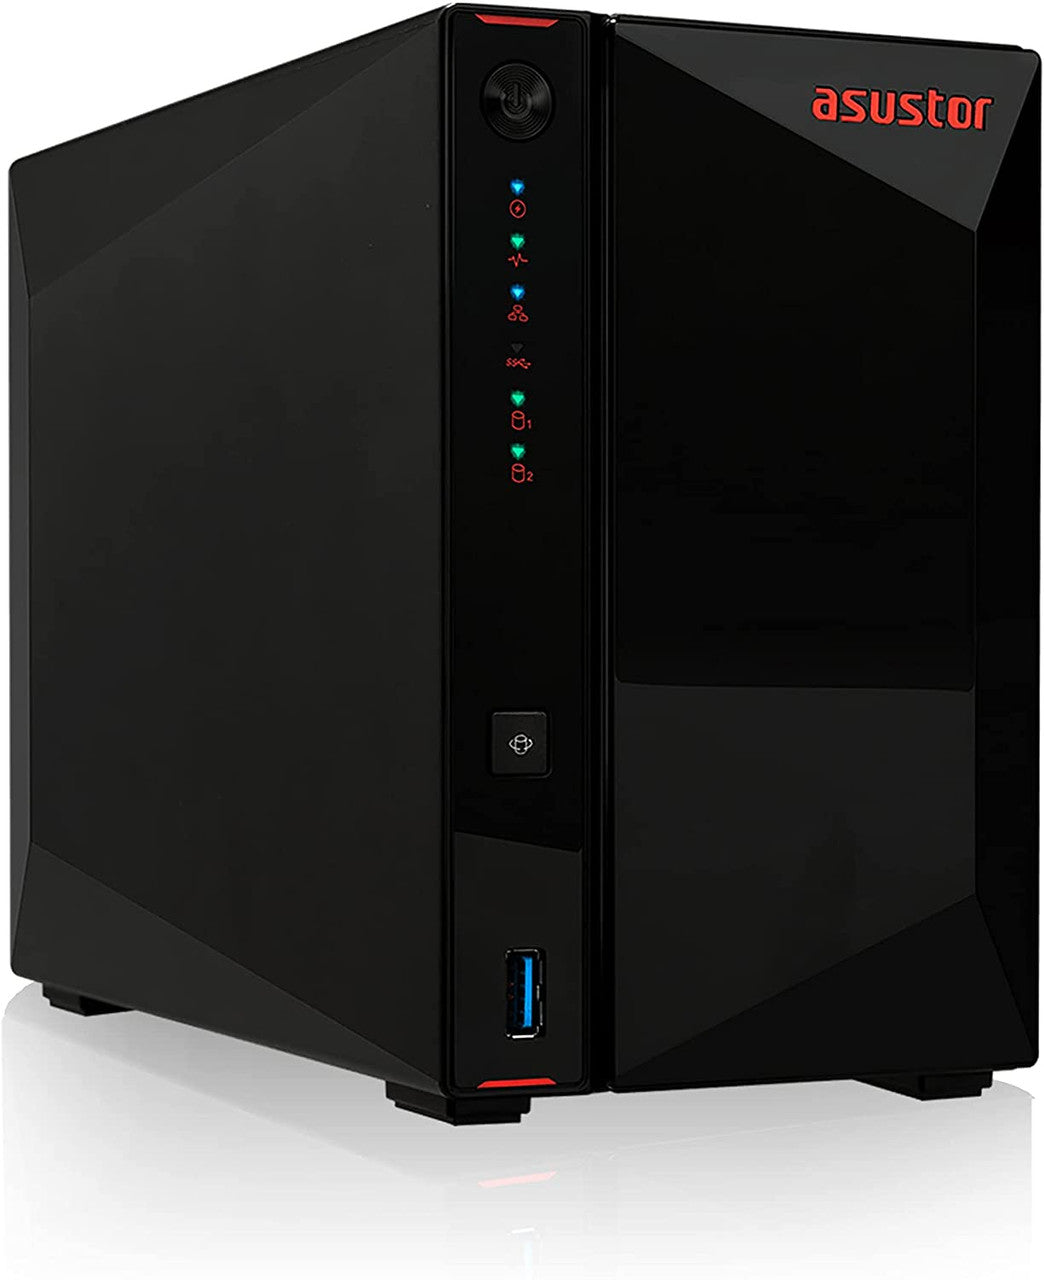 Asustor AS5202T 2-Bay Nimbustor 2 NAS with 2GB RAM and 16TB (2 x 8TB) Seagate Ironwolf NAS Drives Fully Assembled and Tested